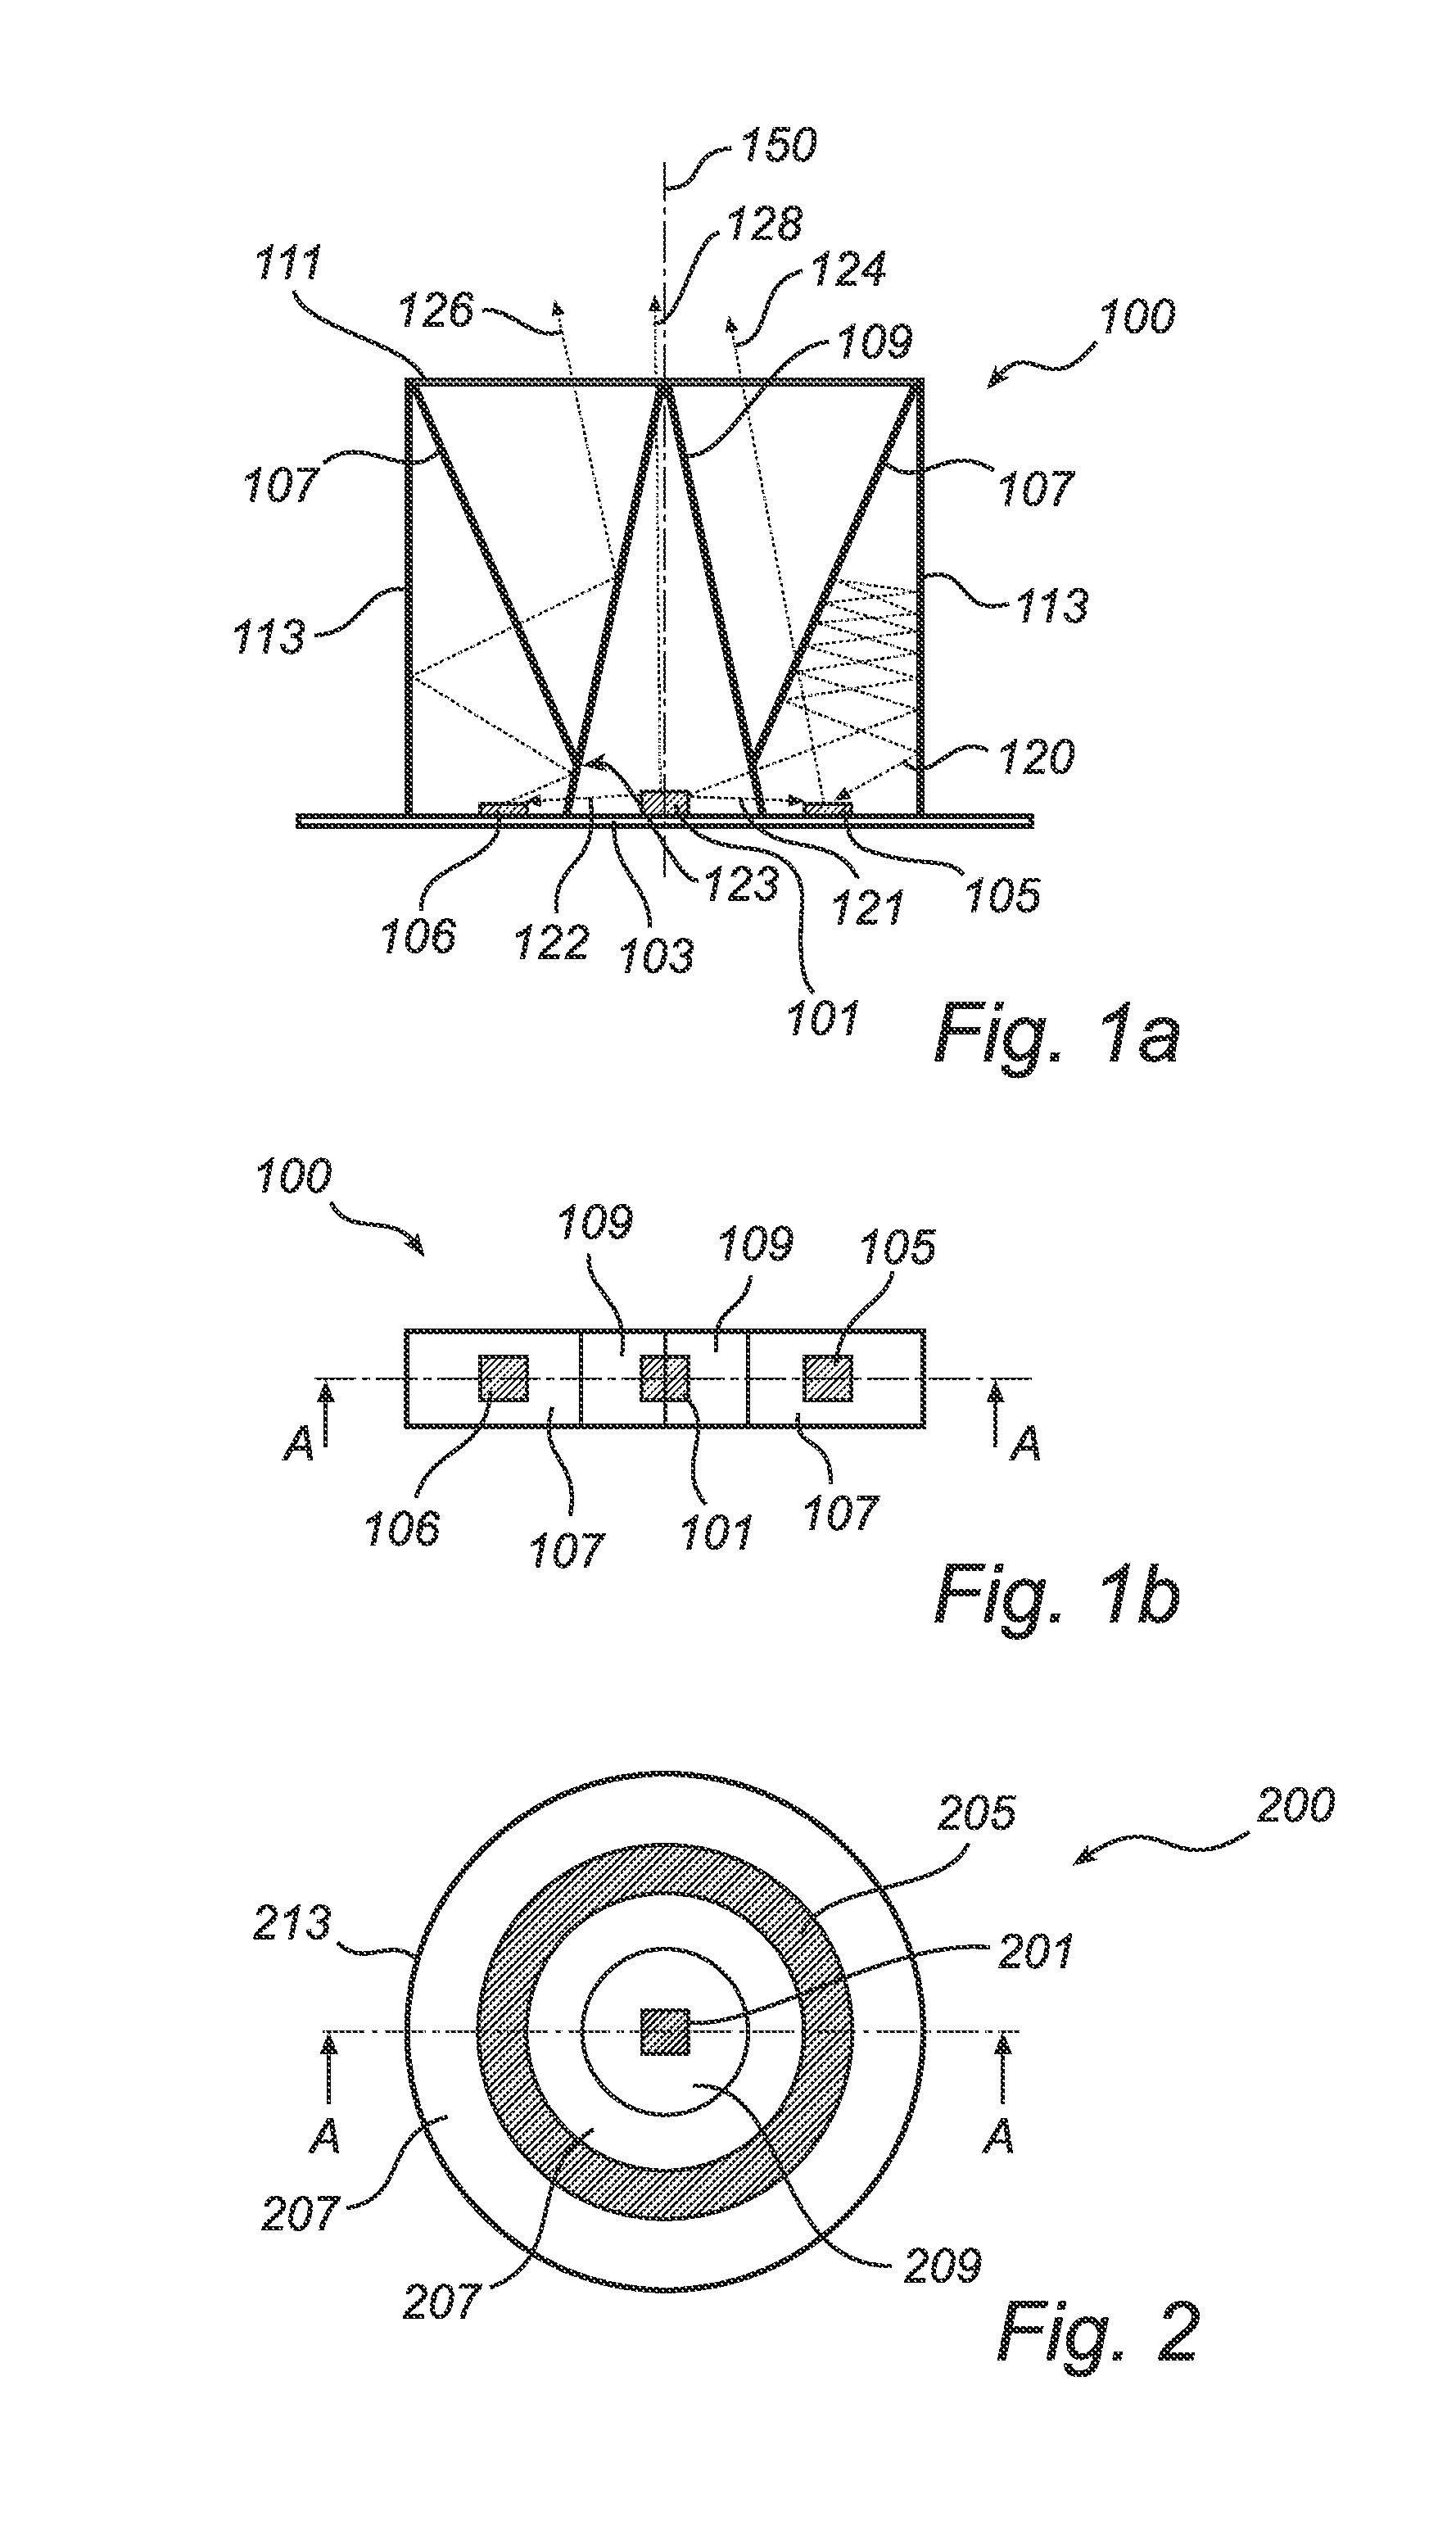 Lighting system with dichromatic surfaces